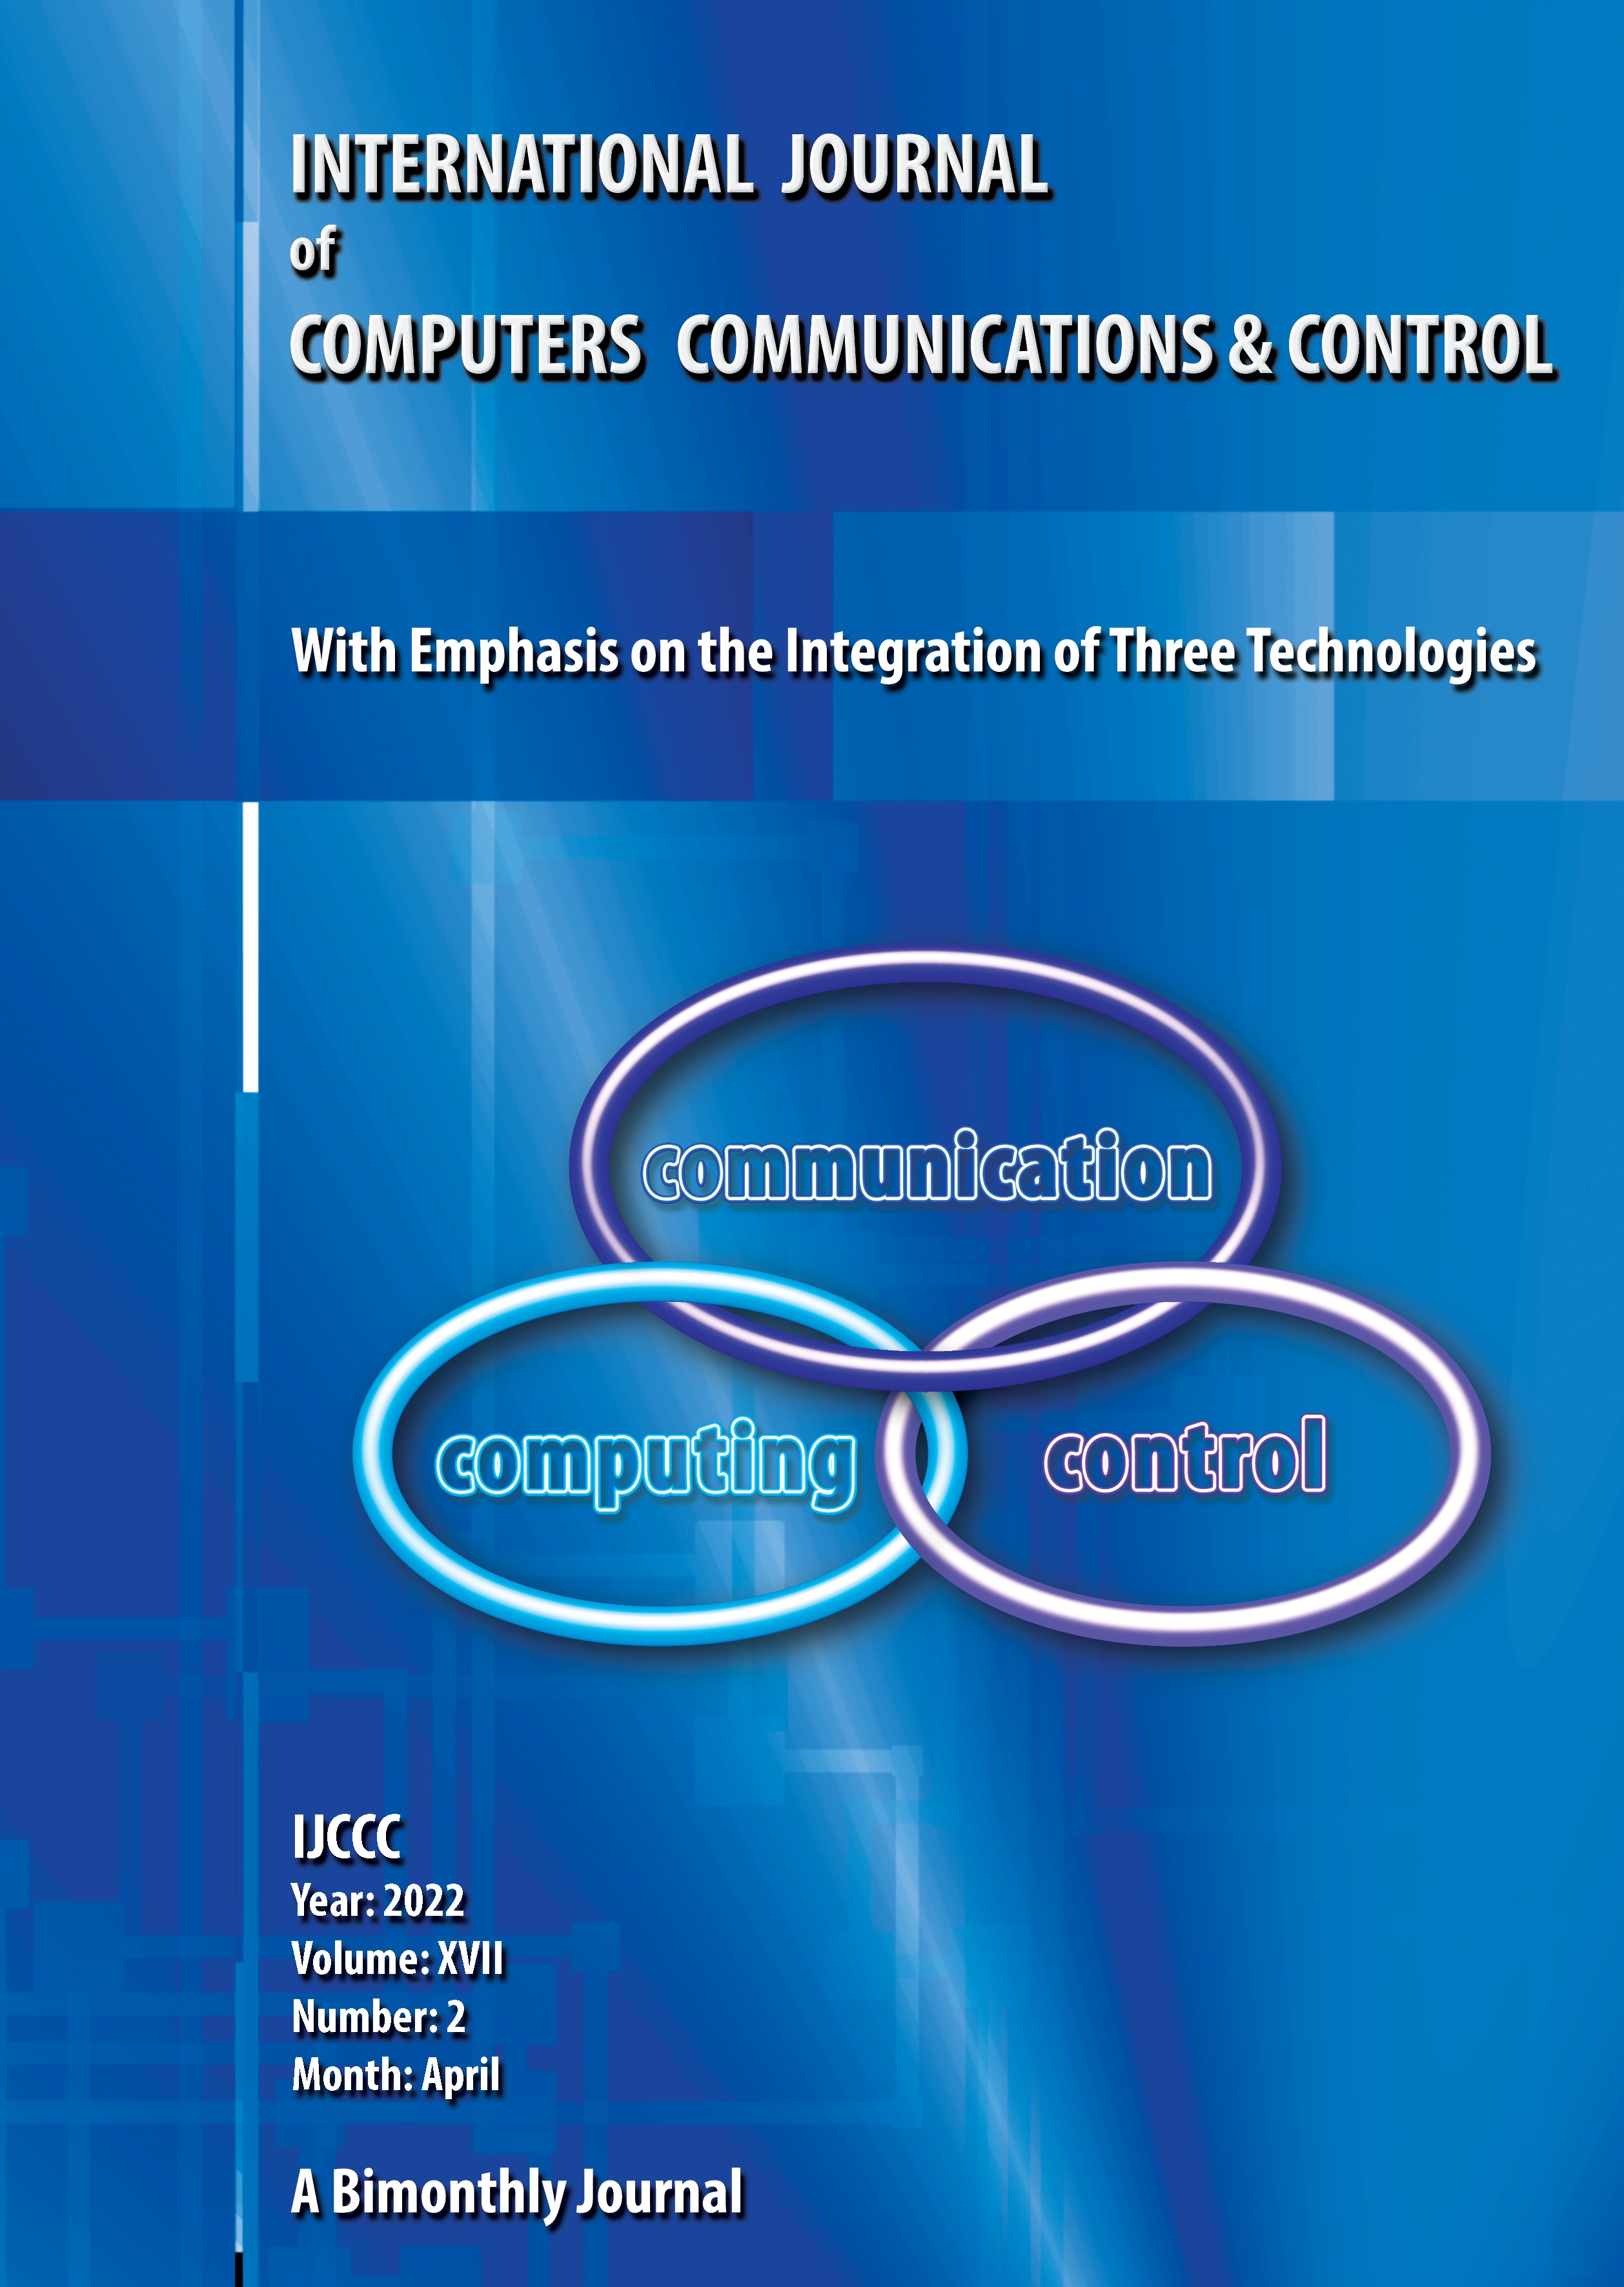 					View Vol. 17 No. 2 (2022): International Journal of Computers Communications & Control (April)
				